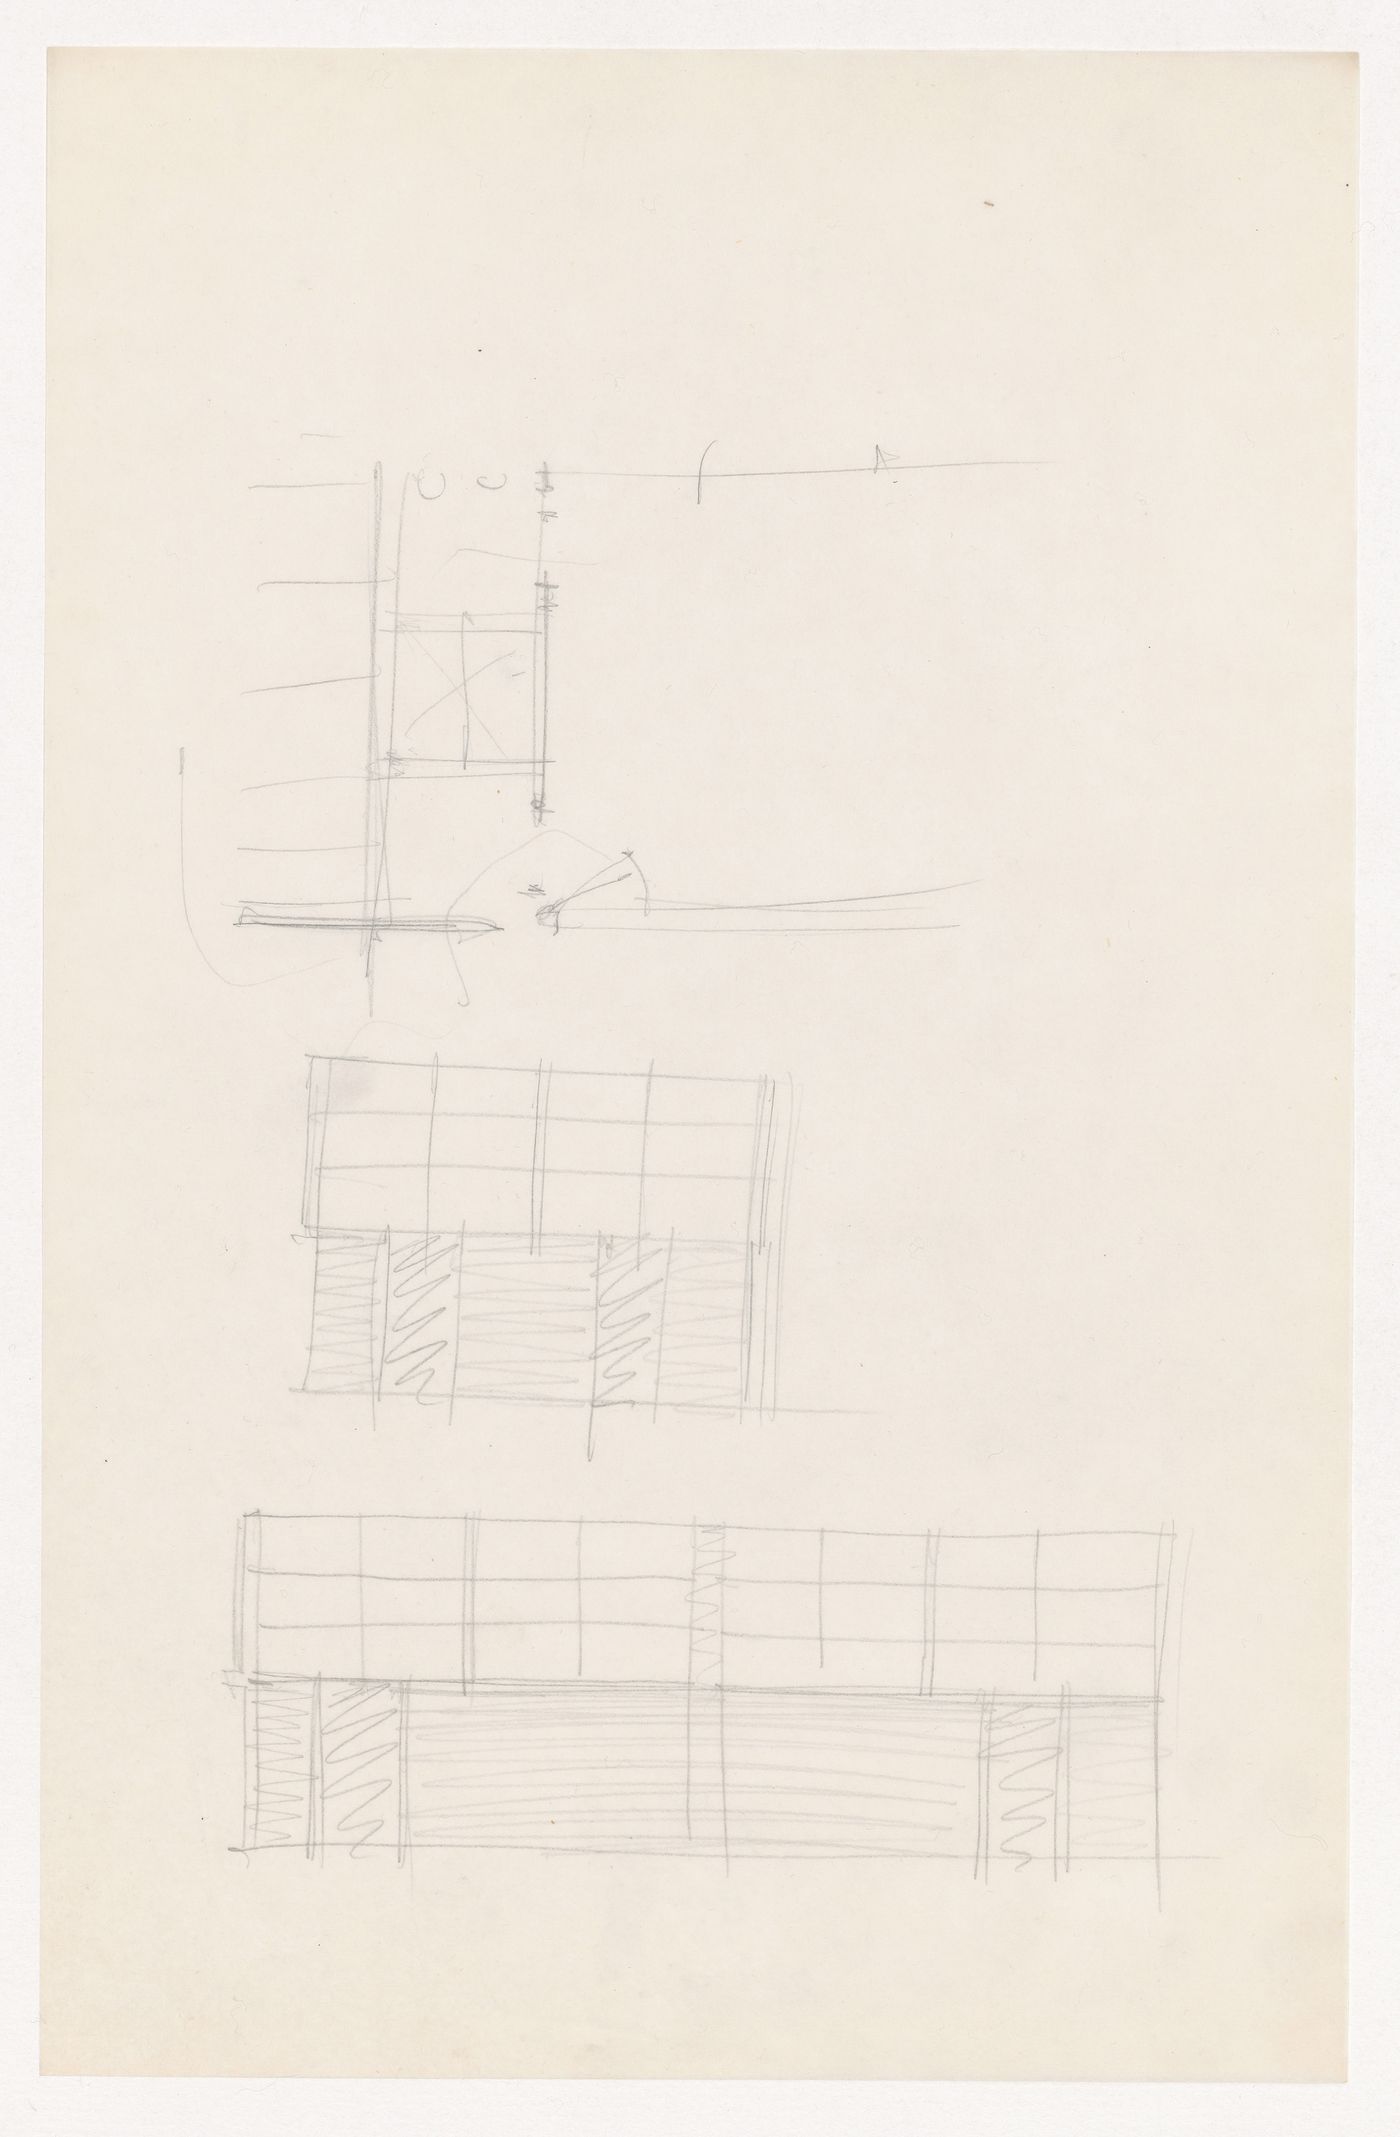 Partial sketch elevations for interior walls and sketch plan for the Gymnasium